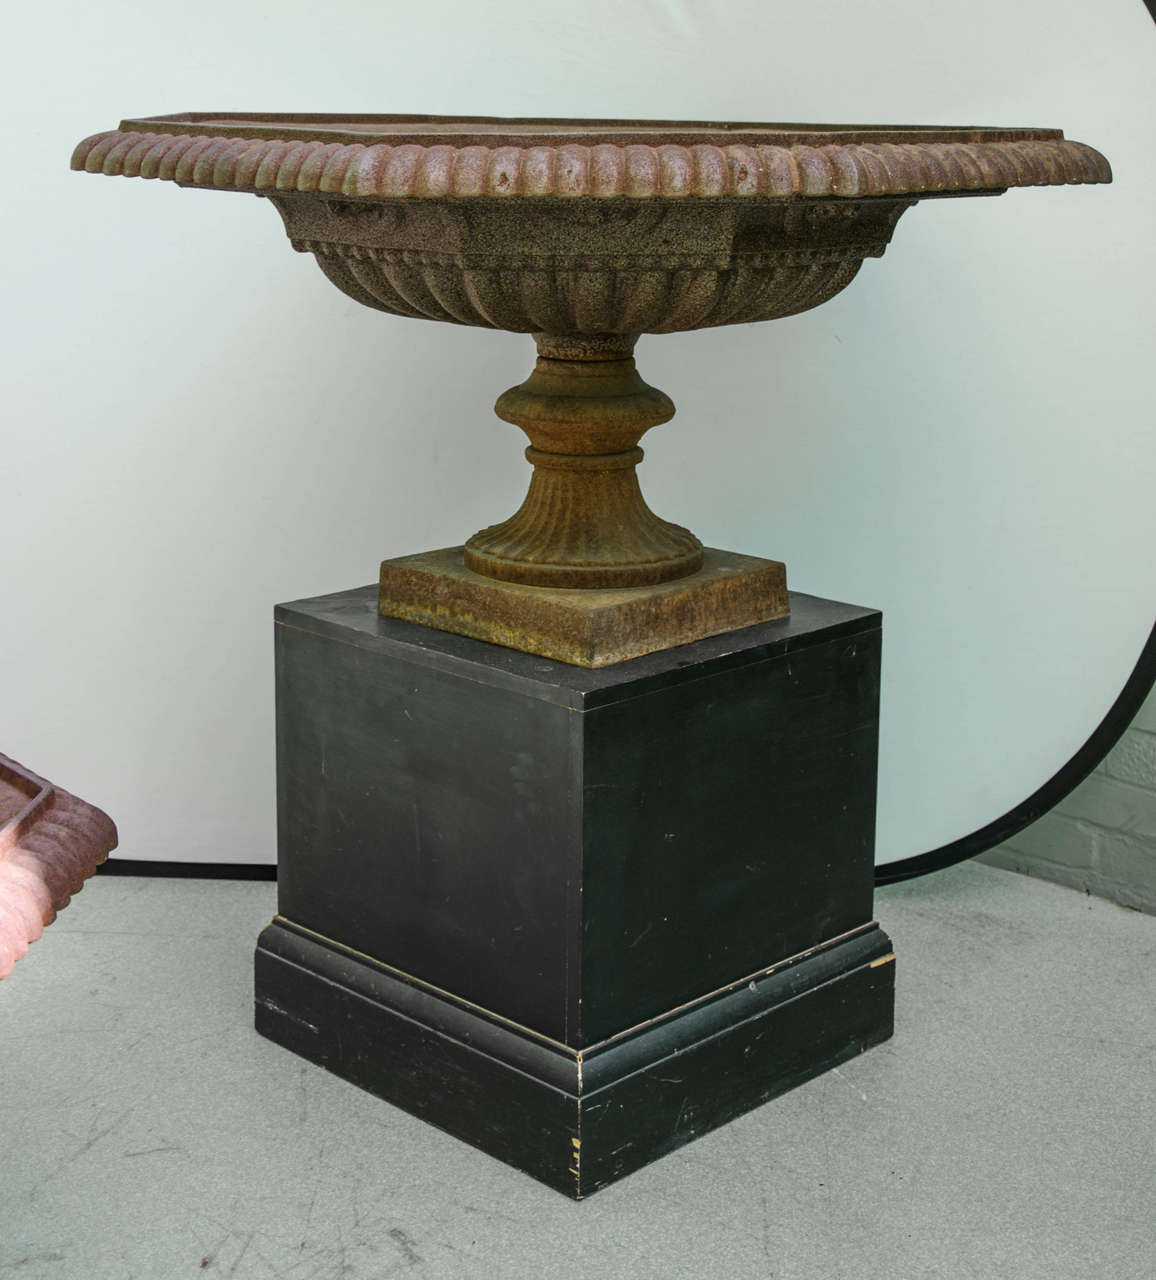 This pair of massively sized garden urns were created from cast iron and date circa 1910. The urns measure 44 in – 112 cm in diameter and a height of 22 in – 56 cm. The bases that the urns are resting on are not included in the sale and are not